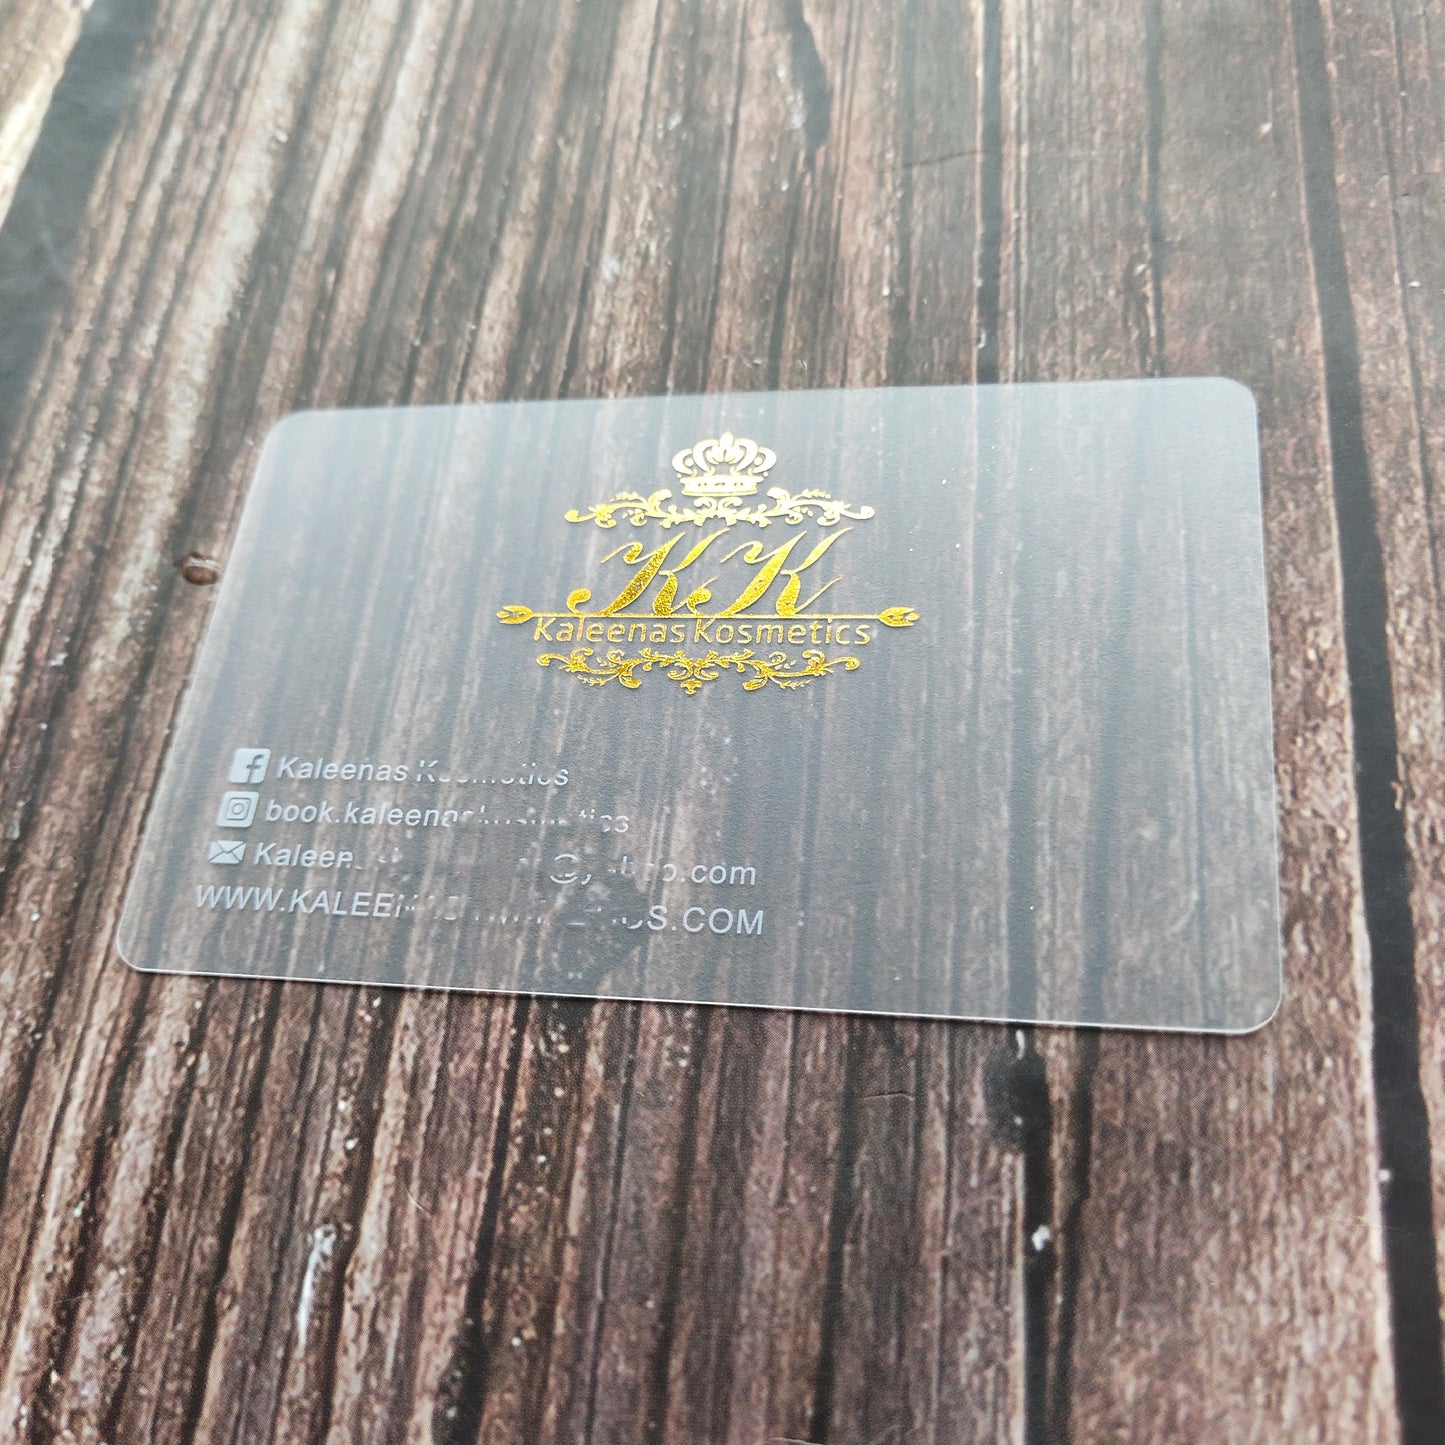 Custom business cards Printed Gold Foil Transparent Plastic Clear PVC Business Card